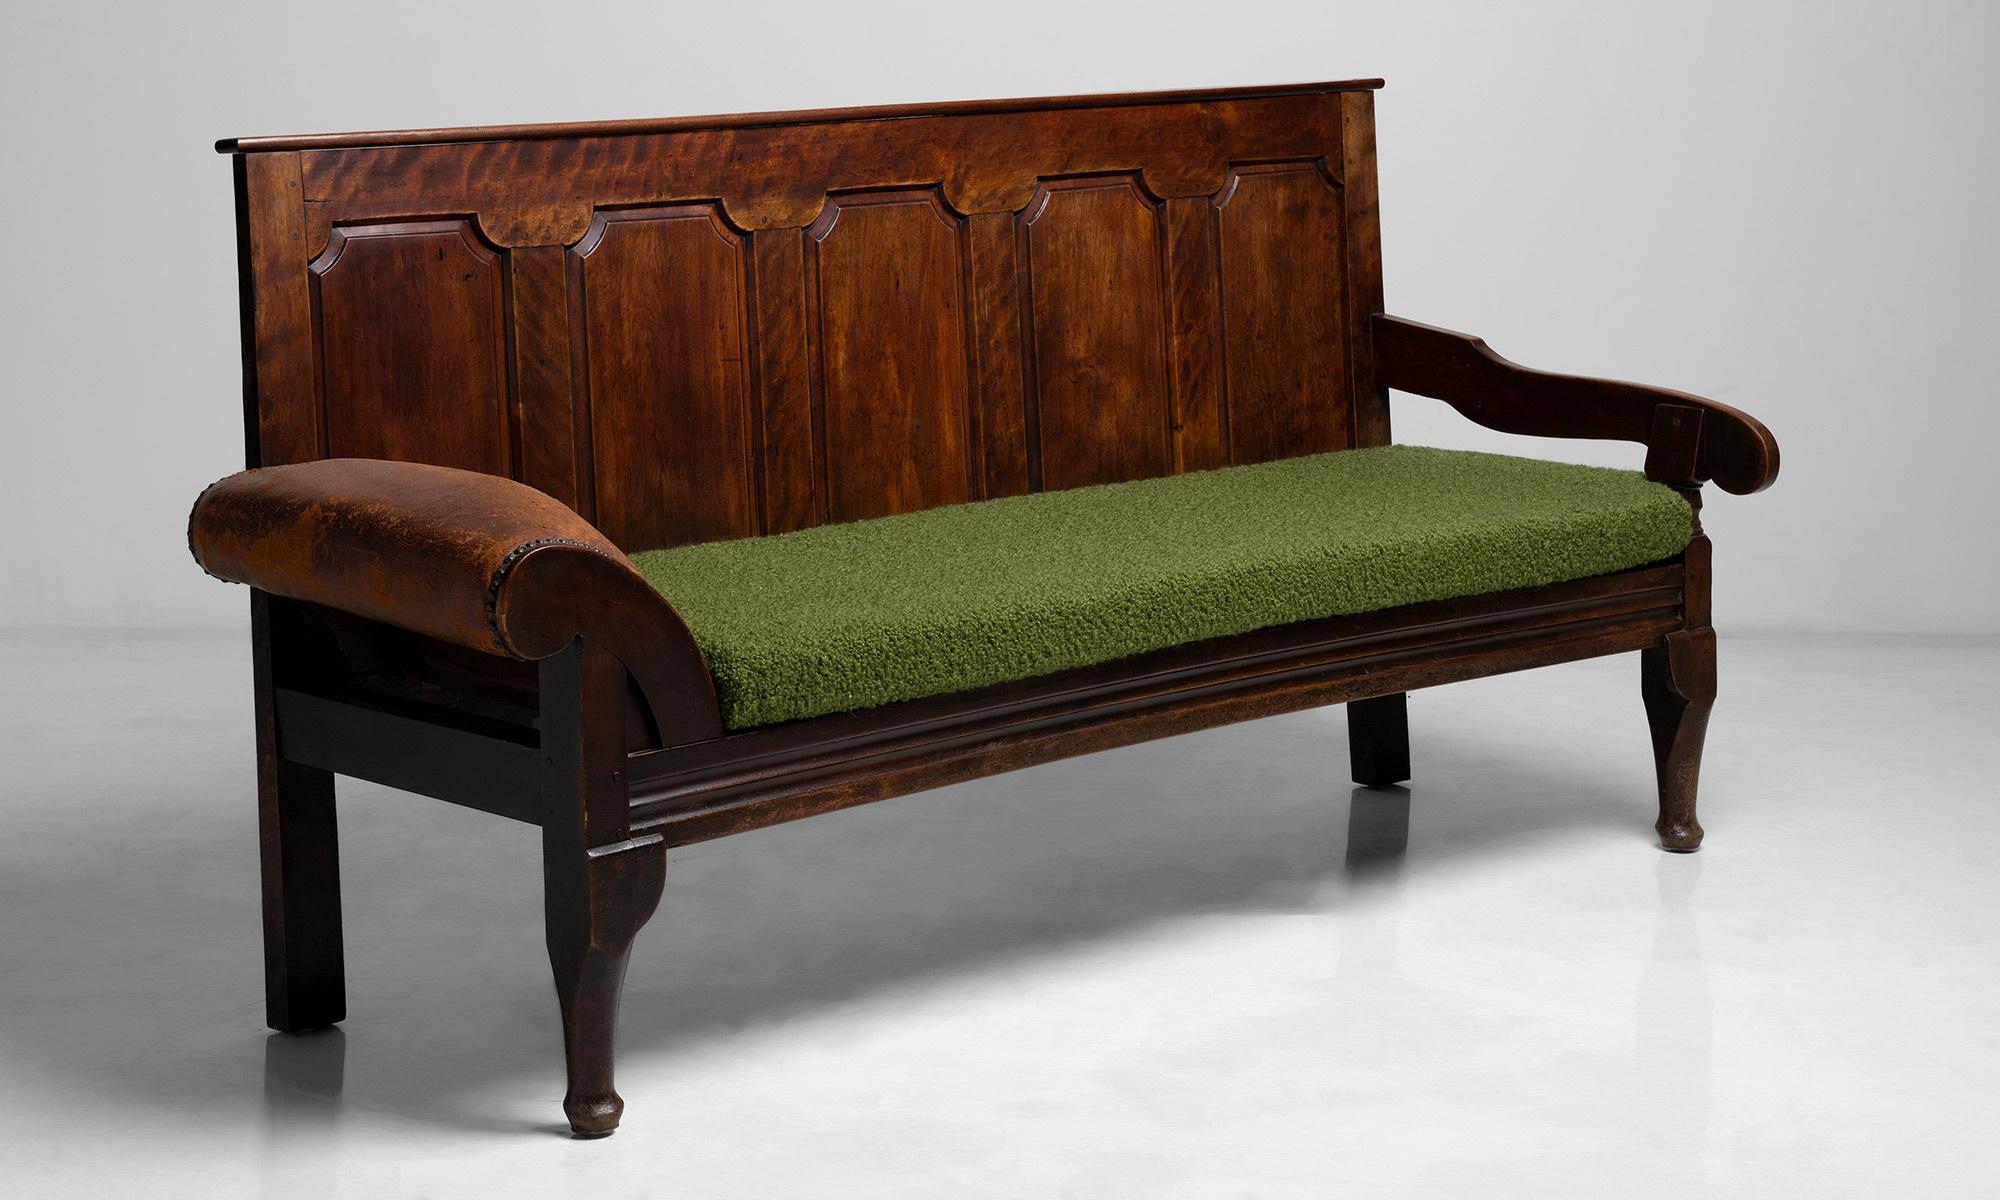 Coachman’s Settle

England circa 1790

Unique bench constructed in solid fruit wood with paneled back and leather upholstered roll over arm. 

Designed for the coachman to rest his head. Seat cushion newly upholstered in boucle by Pierre